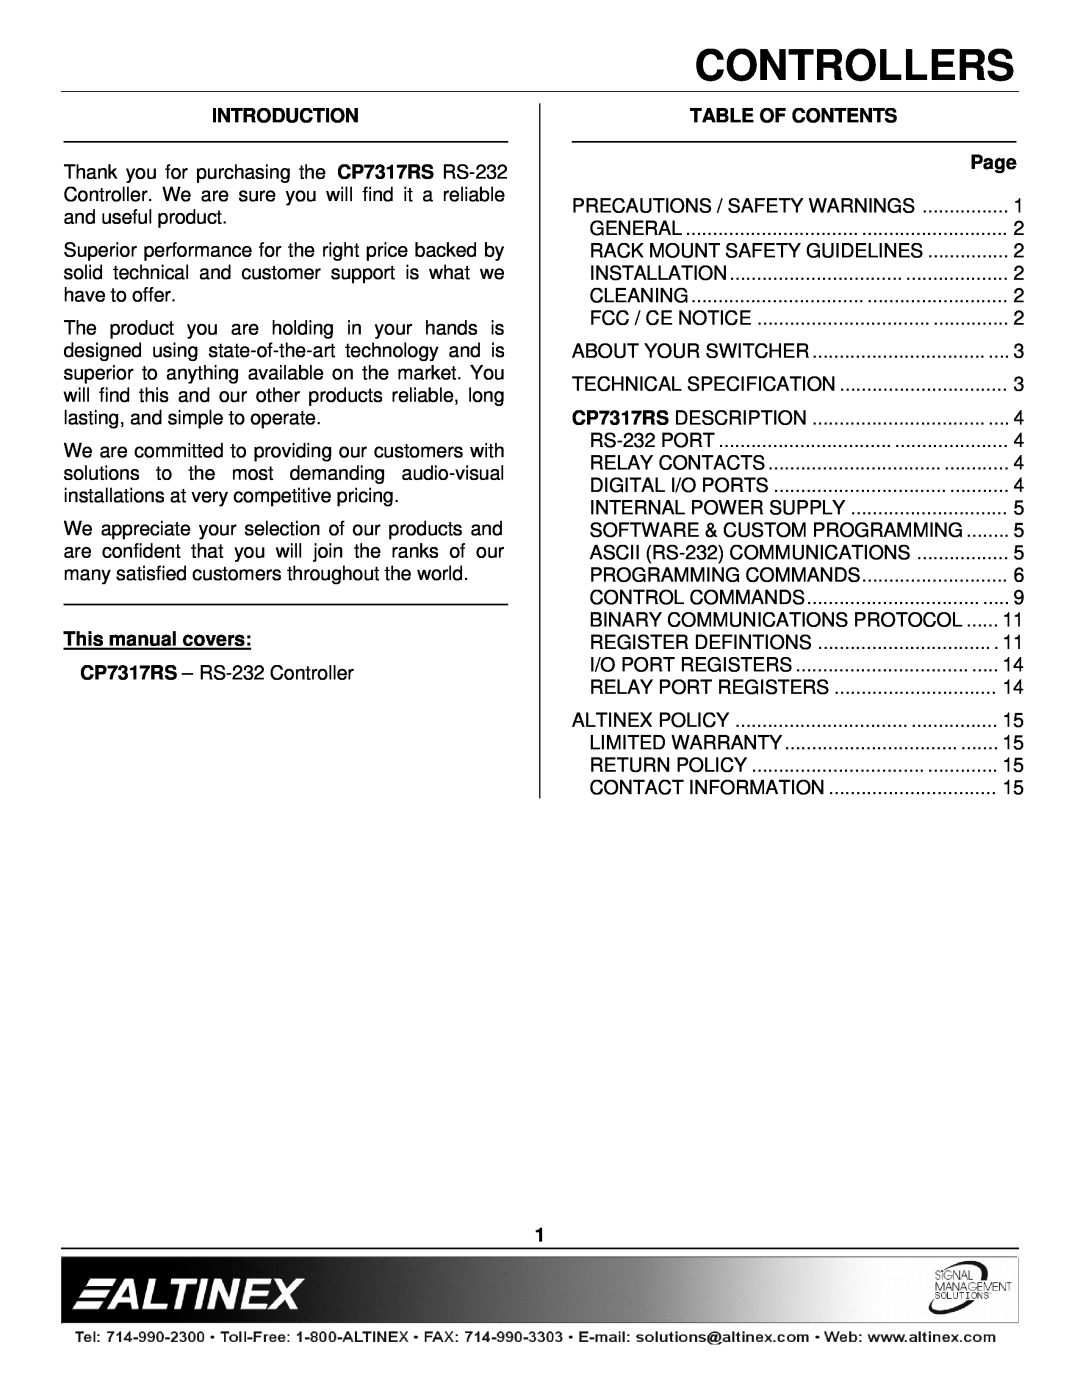 Altinex CP7317RS Introduction, This manual covers, Table Of Contents, Controllers 